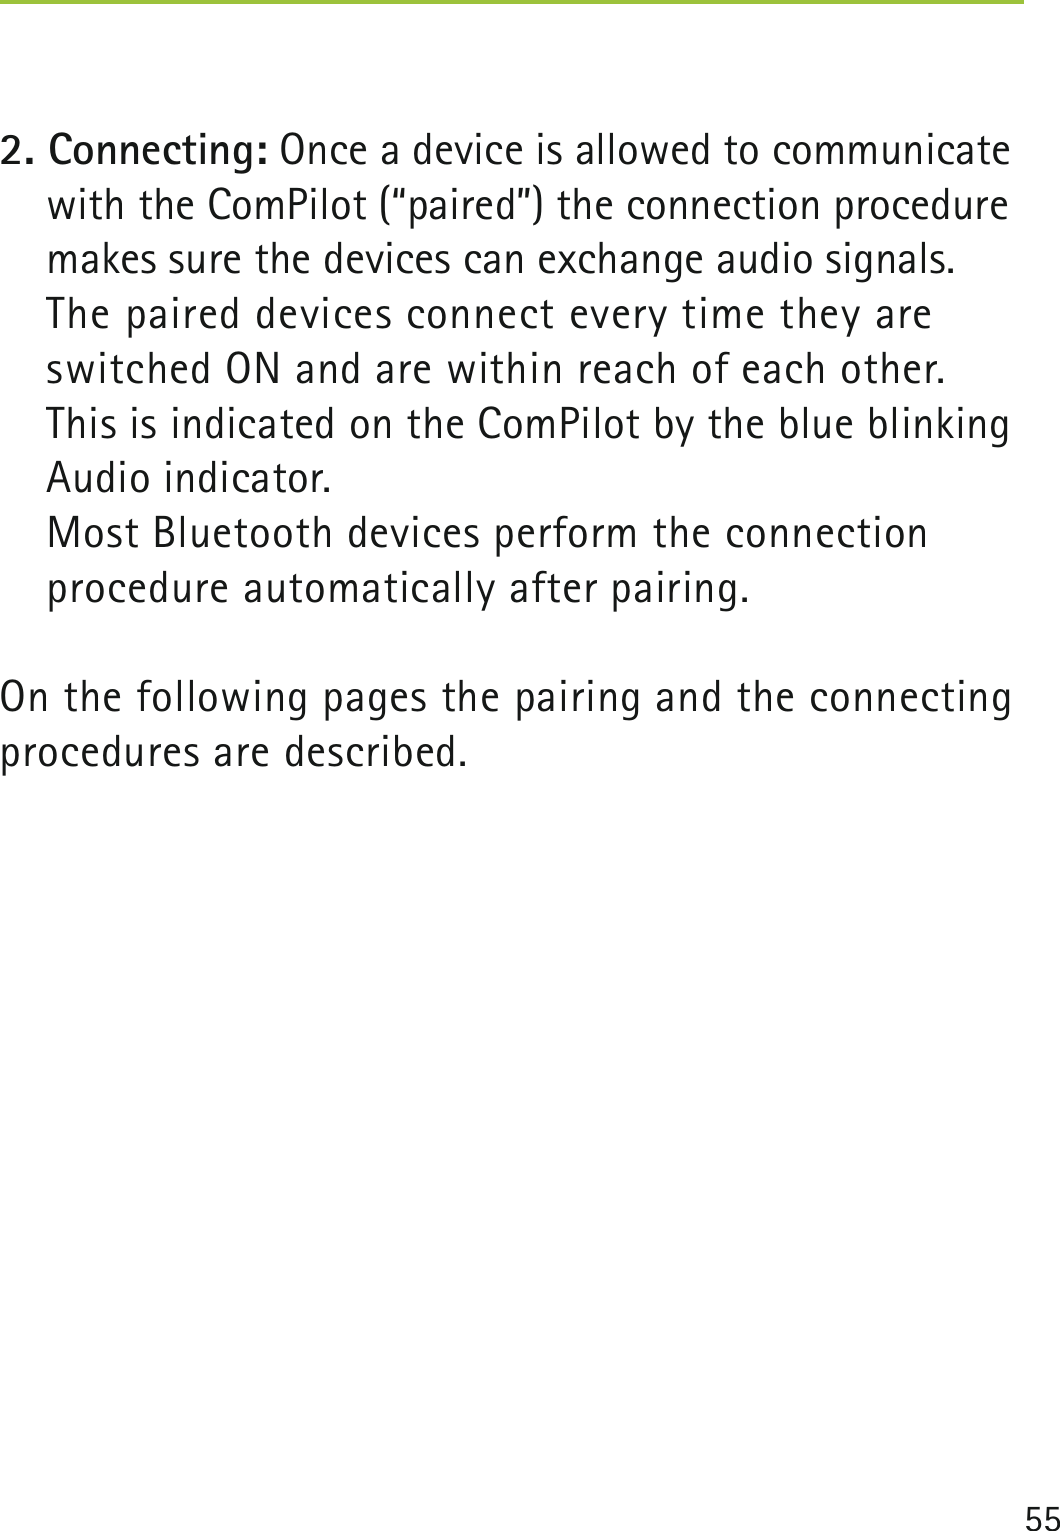 552. Connecting: Once a device is allowed to communicate with the ComPilot (“paired”) the connection procedure makes sure the devices can exchange audio signals.  The paired devices connect every time they are switched ON and are within reach of each other. This is indicated on the ComPilot by the blue blinking Audio indicator.  Most Bluetooth devices perform the connection  procedure automatically after pairing. On the following pages the pairing and the connecting procedures are described. 